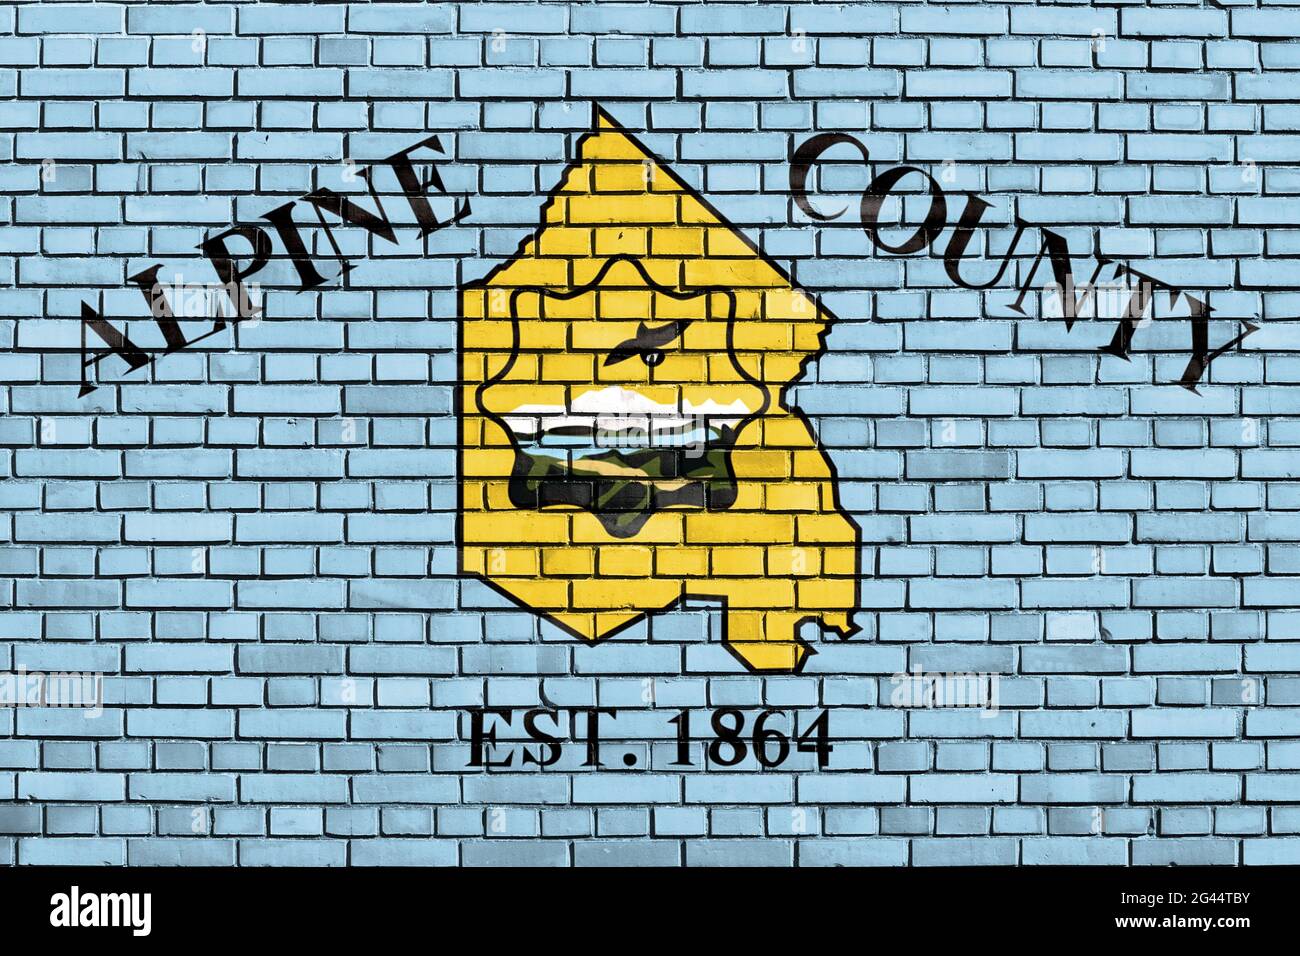 Flag of Alpine County, California painted on brick wall Stock Photo